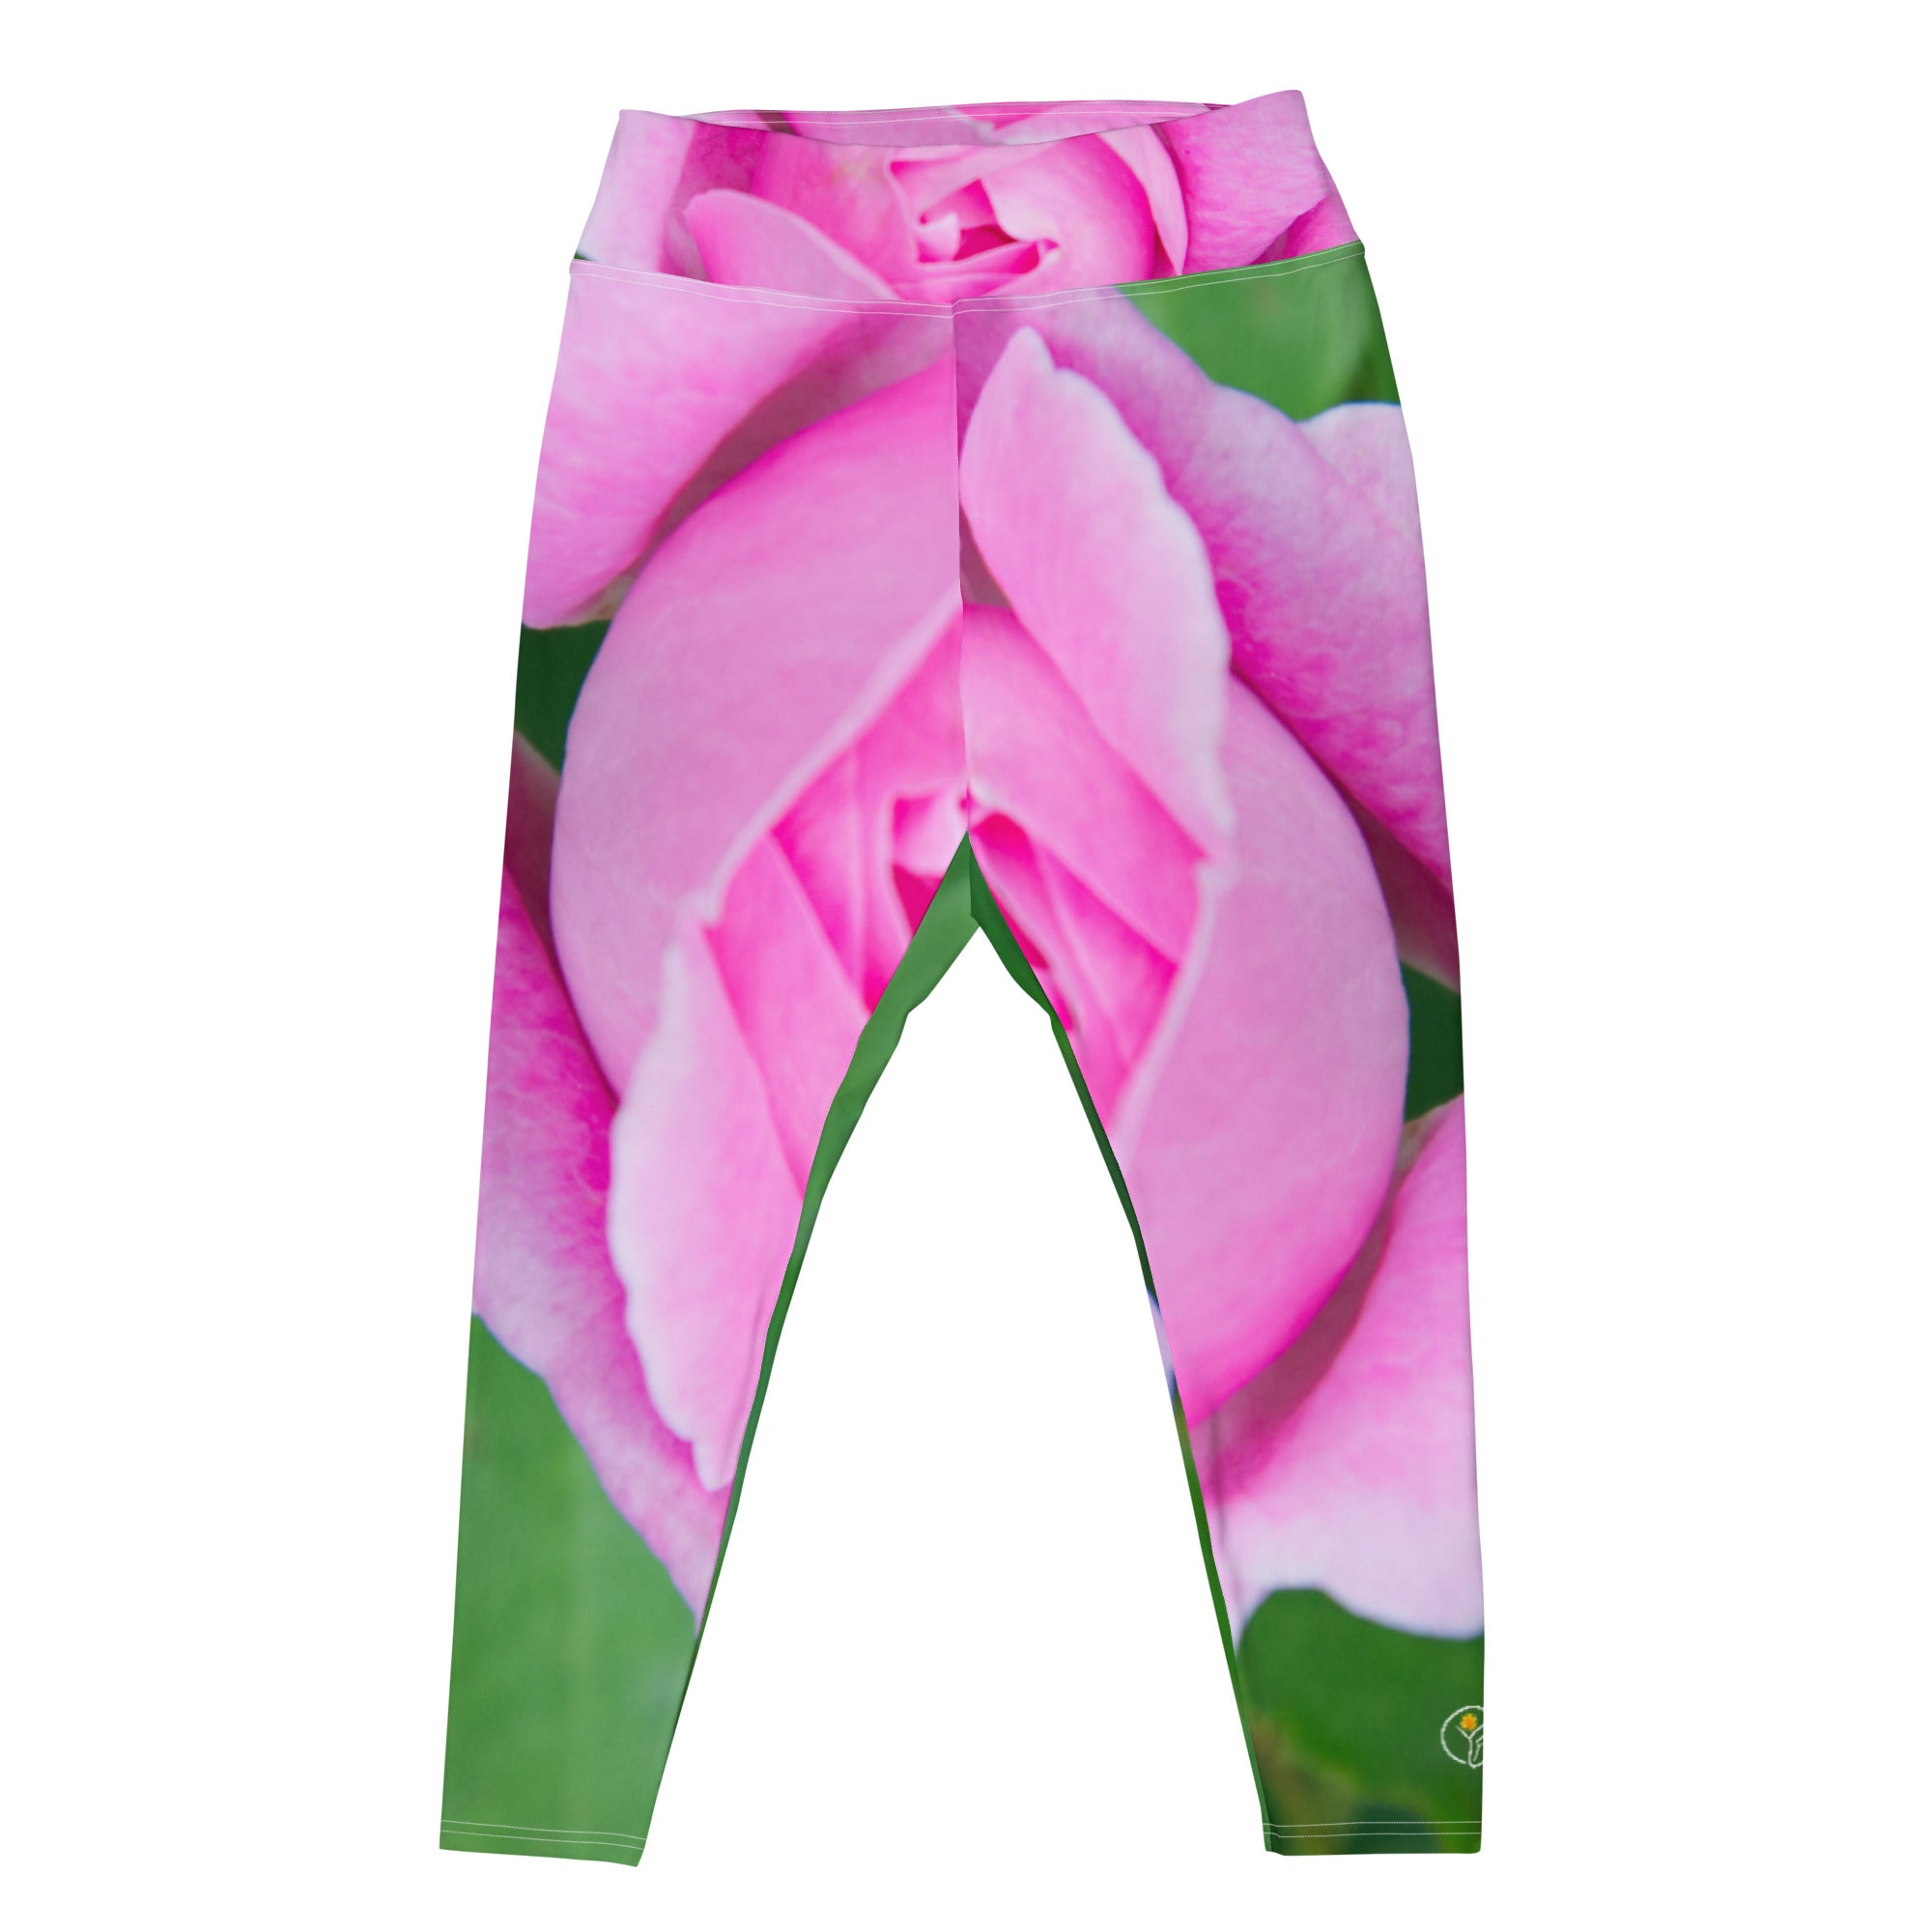 In the Pink of Rose Plus Size Leggings